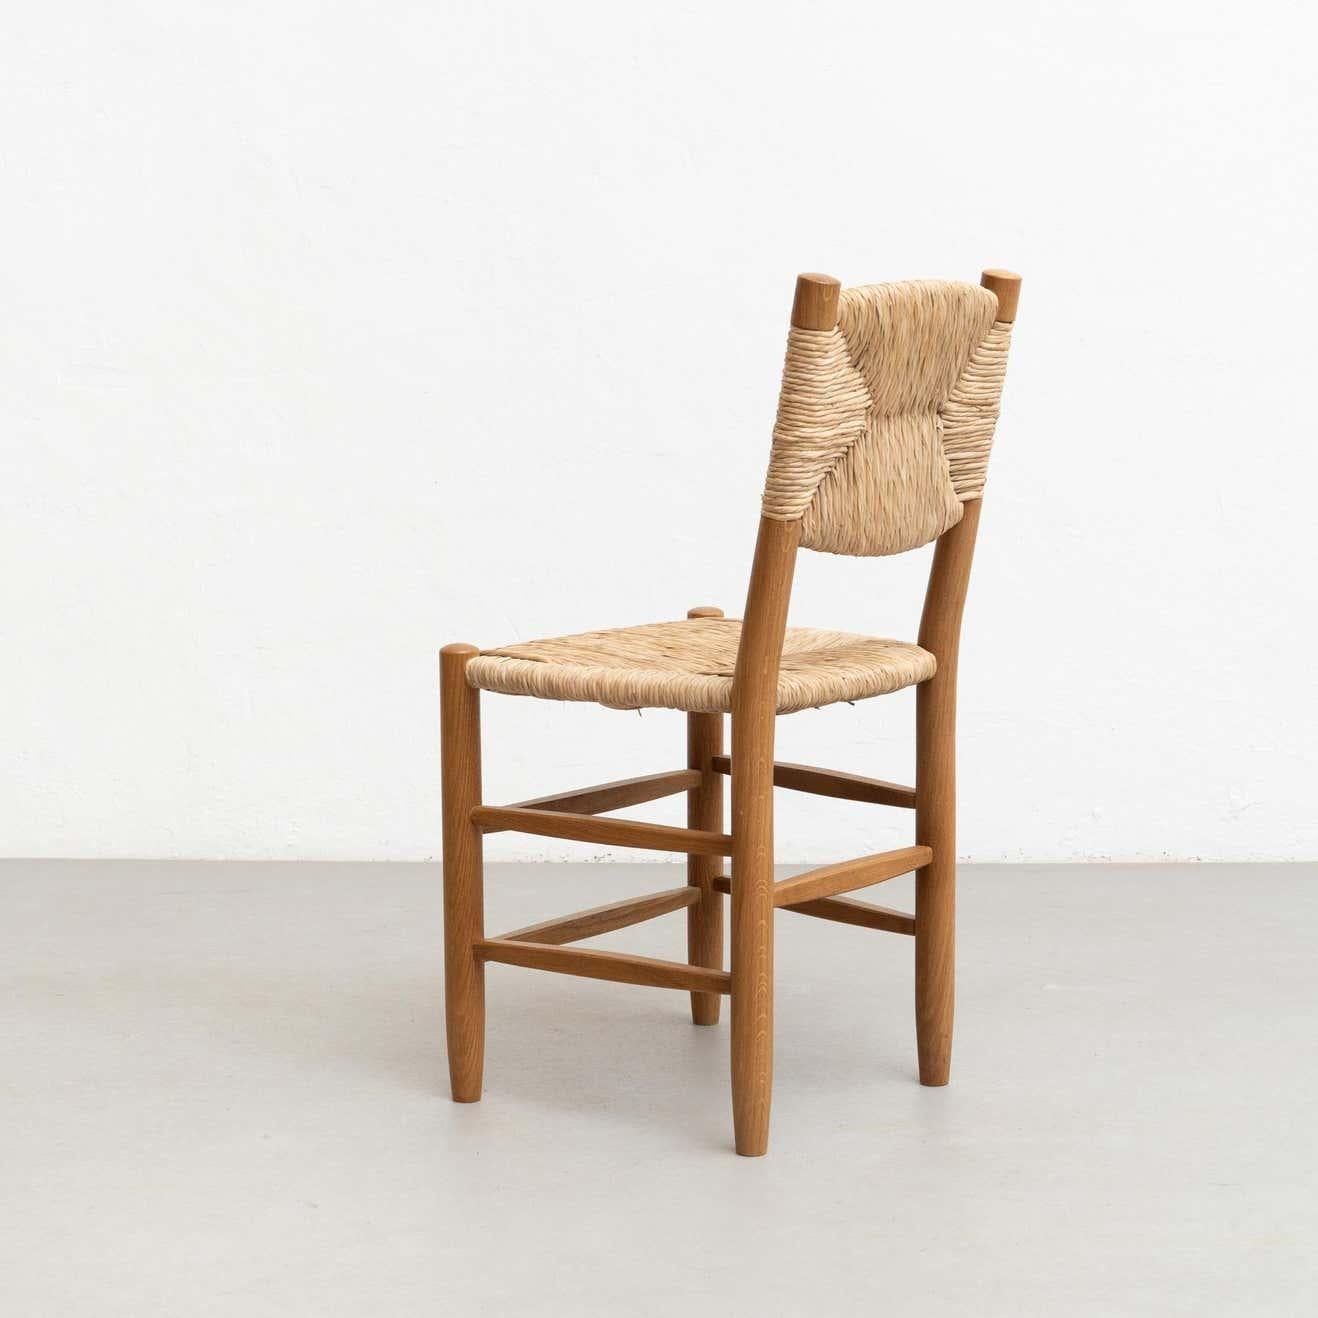 Set of Six After Charlotte Perriand N.19 Chairs, Wood Rattan, Mid-Century Modern For Sale 13